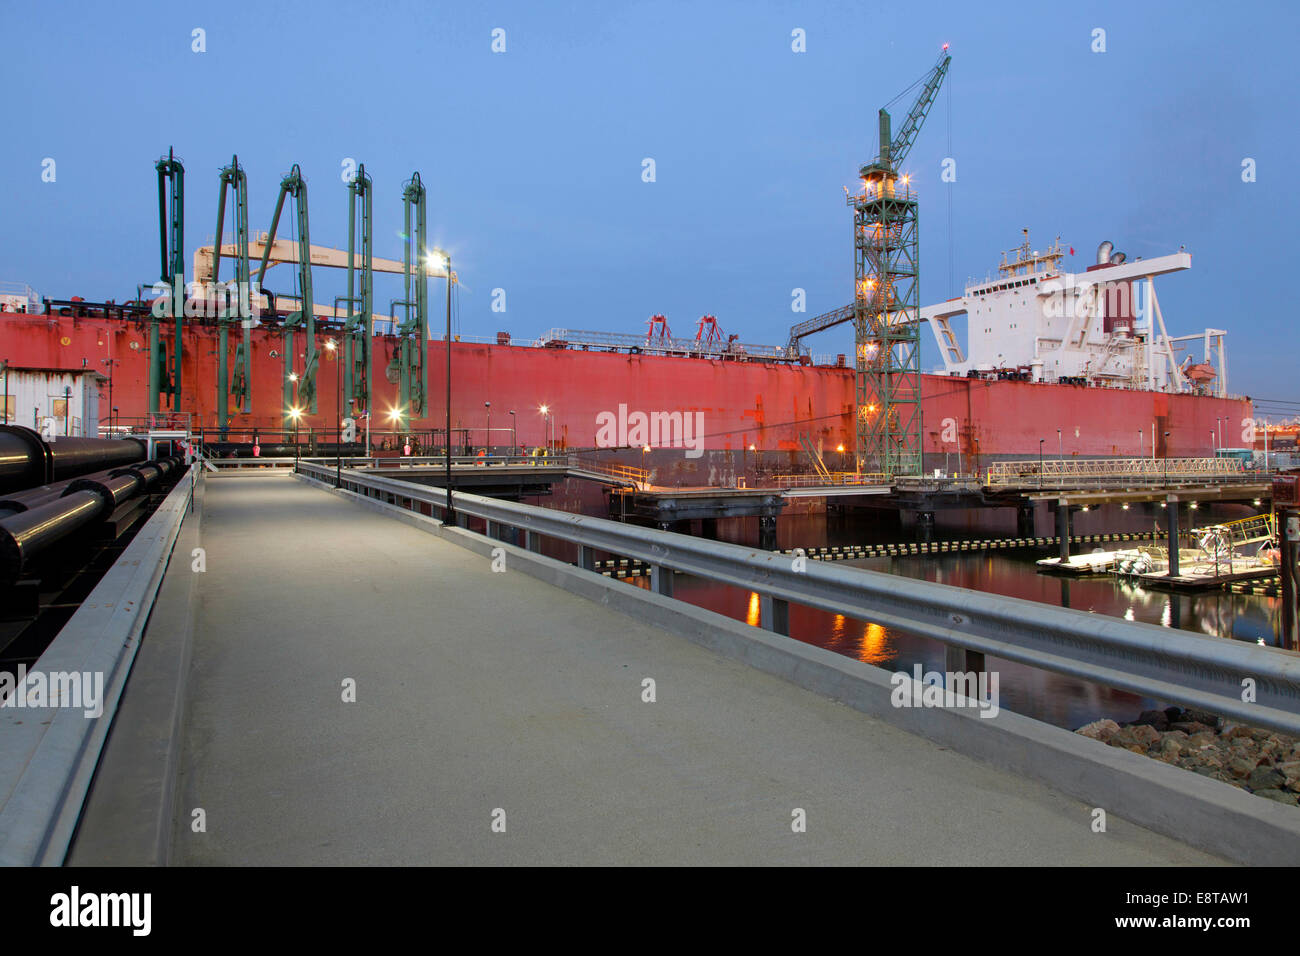 Concrete walkway to container ship in shipyard Stock Photo